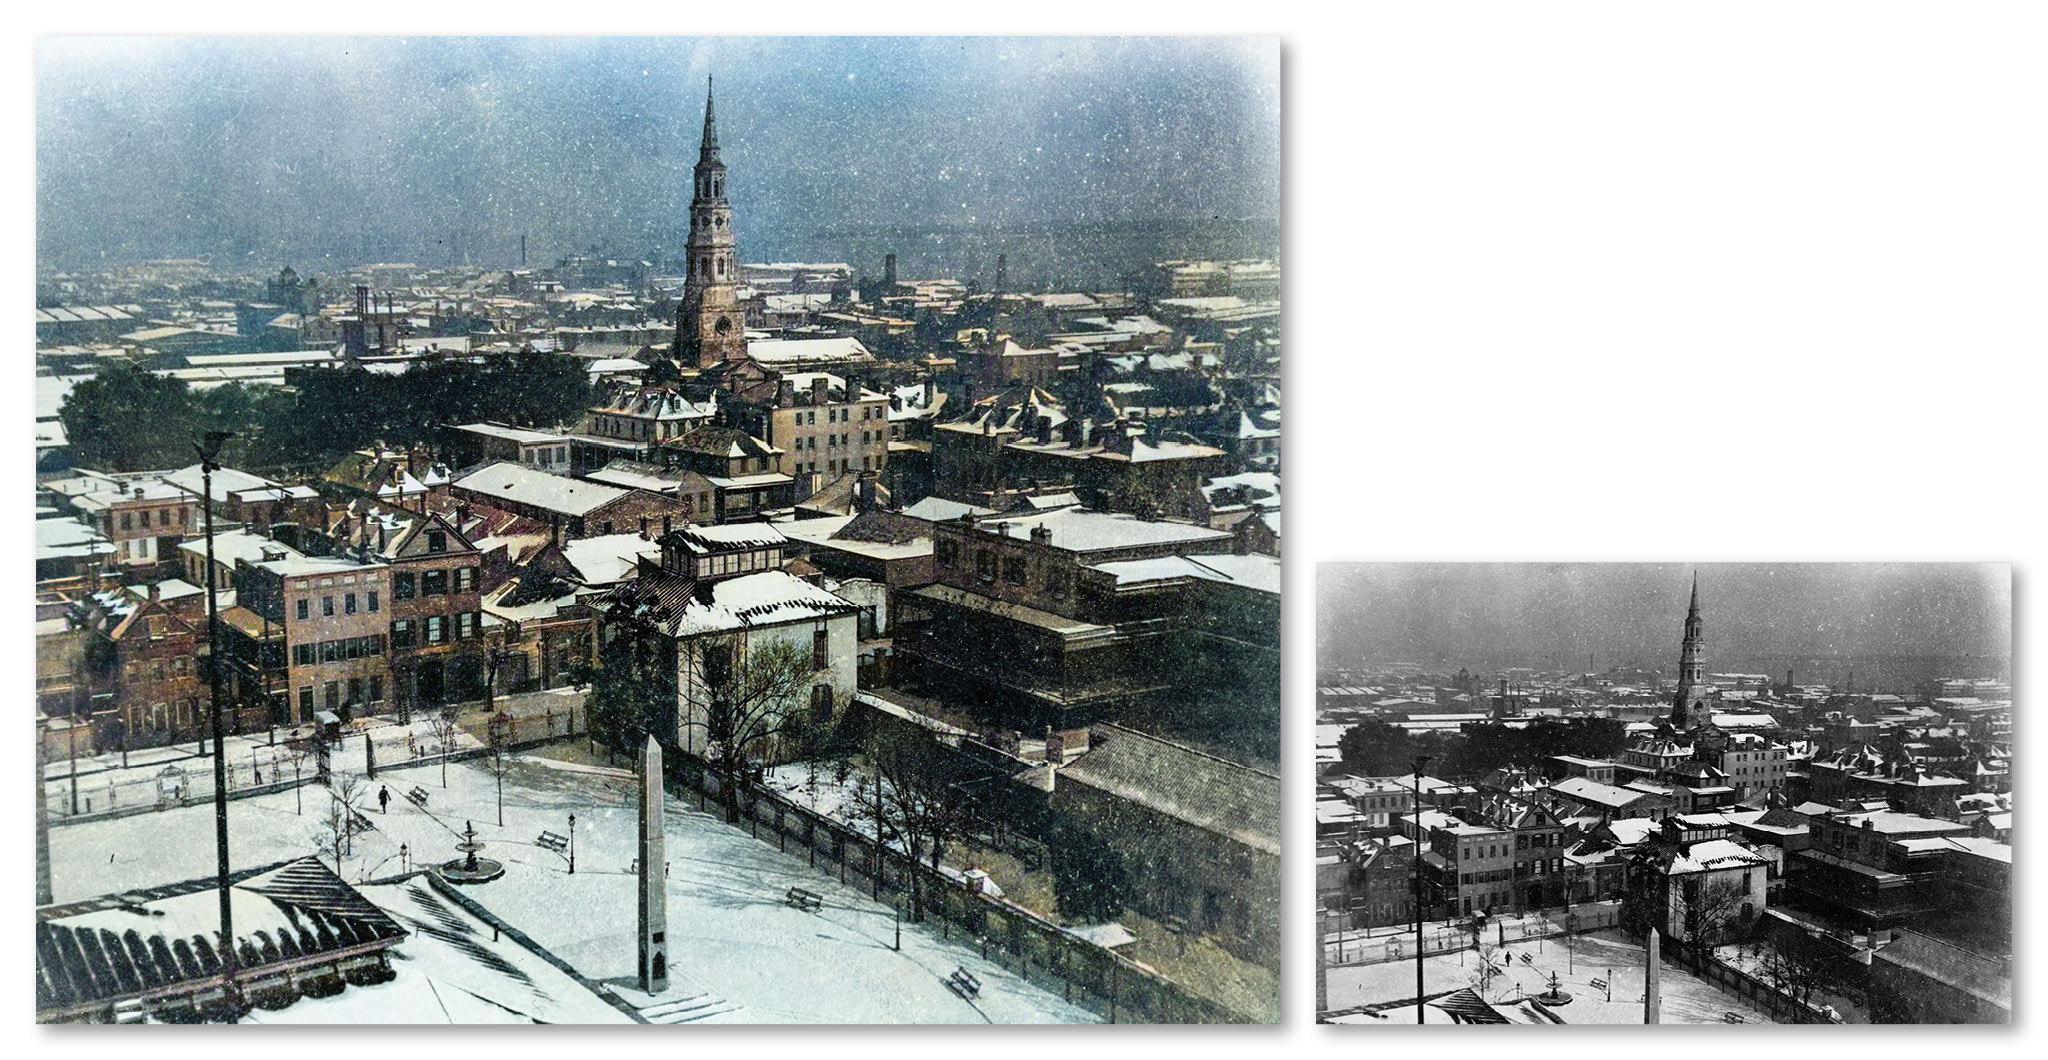 Snowy Rooftops of Charleston, 1899<br> Robert Achurch, 1866-1943<br> Climbing high above the city, Robert Achurch focused his camera on the parallel line between the Washington Light Infantry monument and St. Philip’s Church.